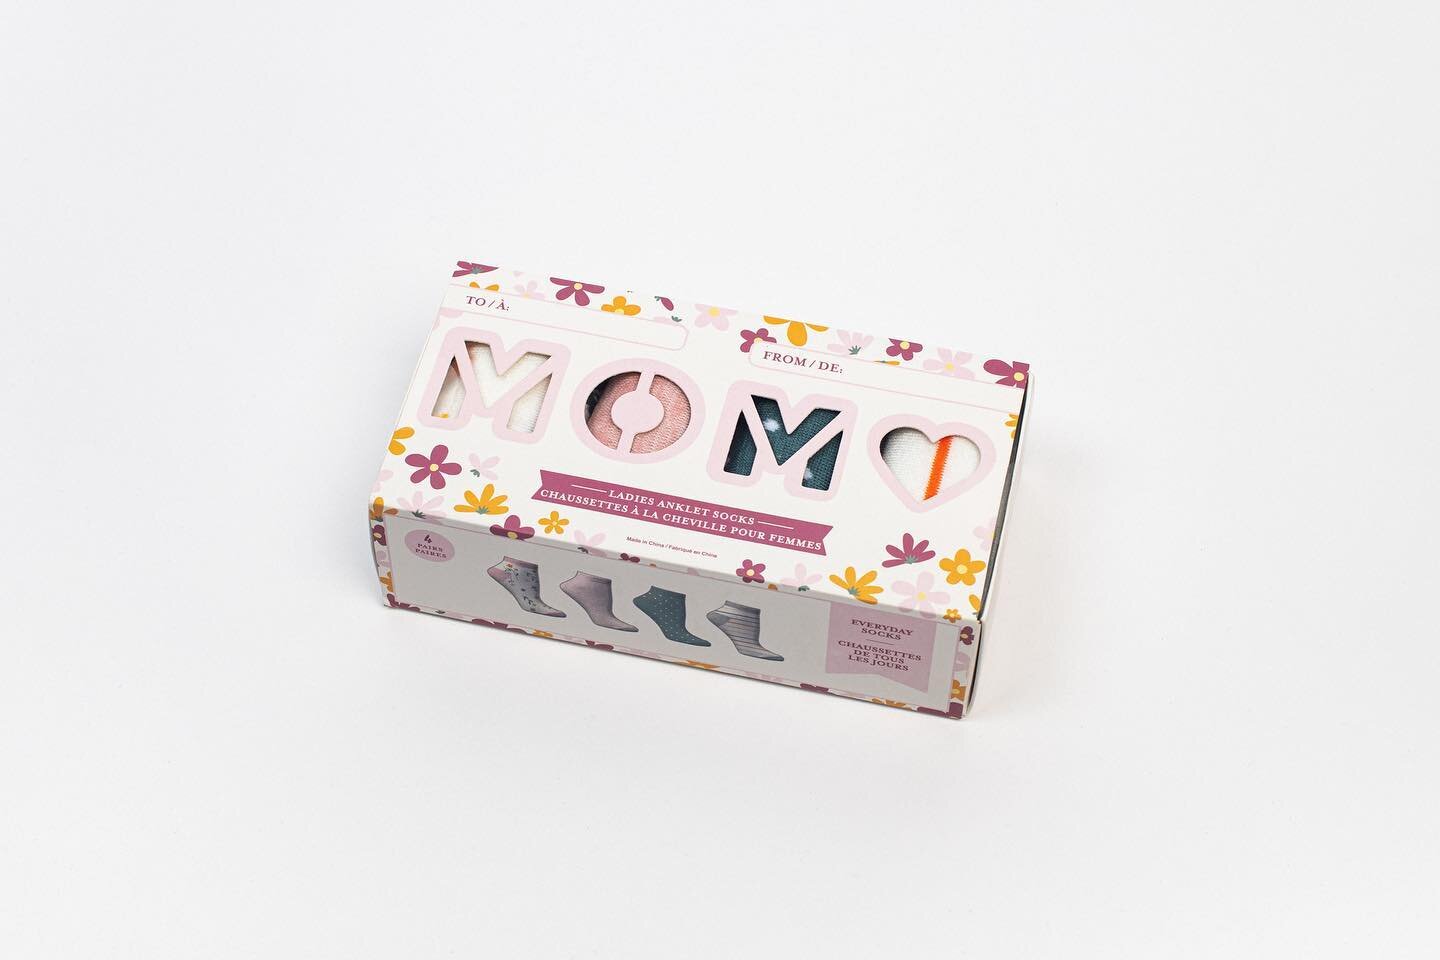 Happy Mother&rsquo;s Day! 💗
Making gift giving easy with creative packaging. Featuring our sock box that we can customize to your needs. 
.
.
.
.
.
.
#mothersday #gertex #creative #custompackaging #design #socks #giftideas #giftguide #custom #b2b #c